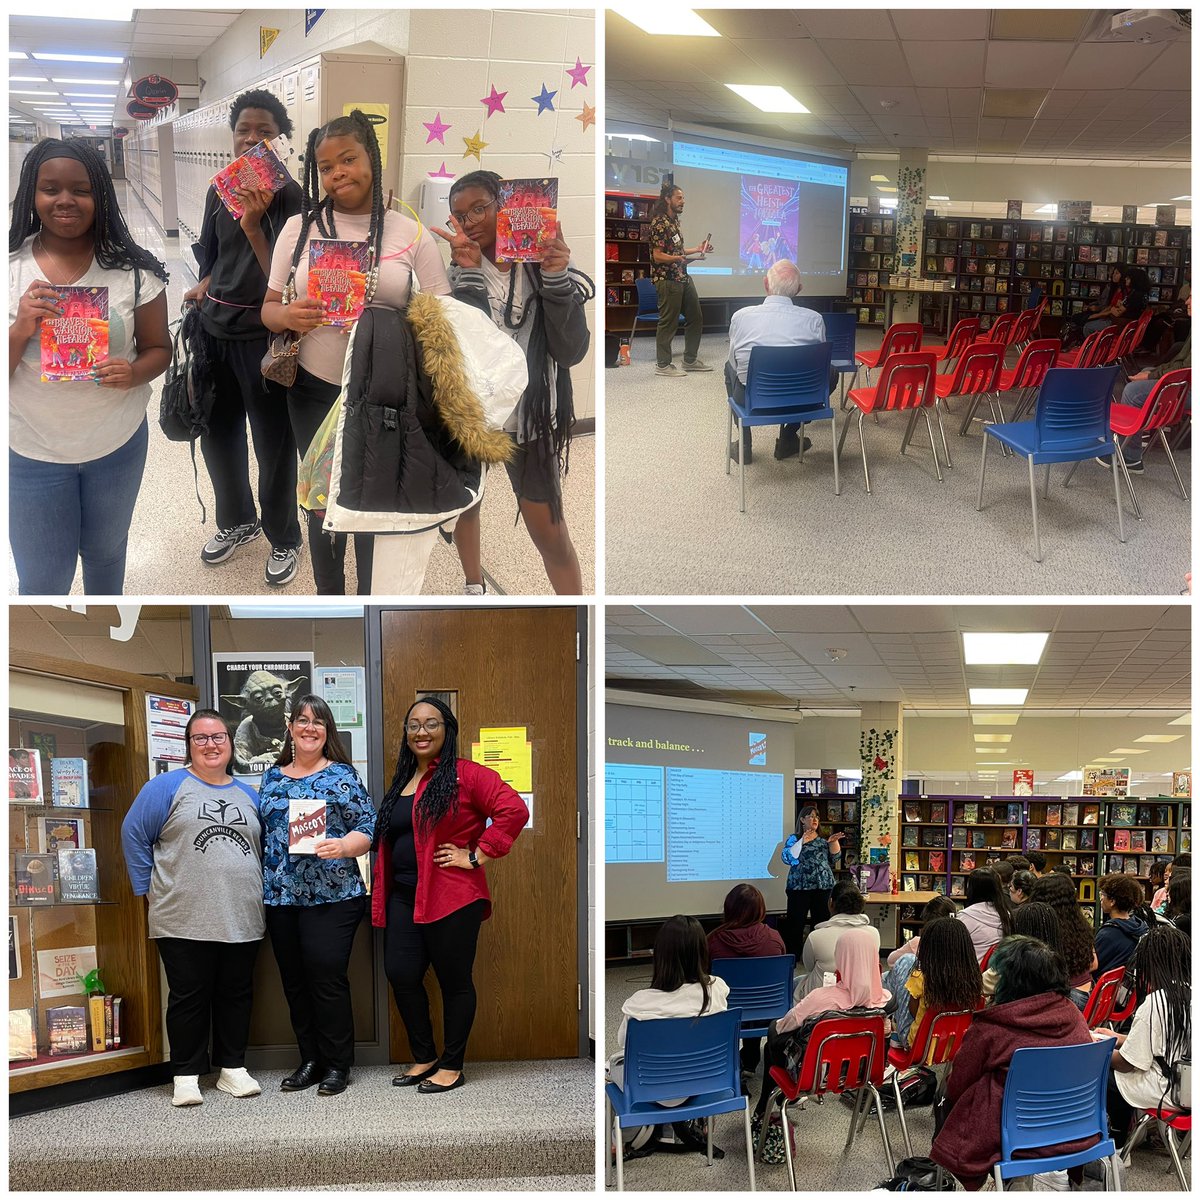 It’s a great day @Byrd_Middle for Duncanville Reads! Students heard from authors Traci Sorell and Adi Alsaid📚 #DuncanvilleReads